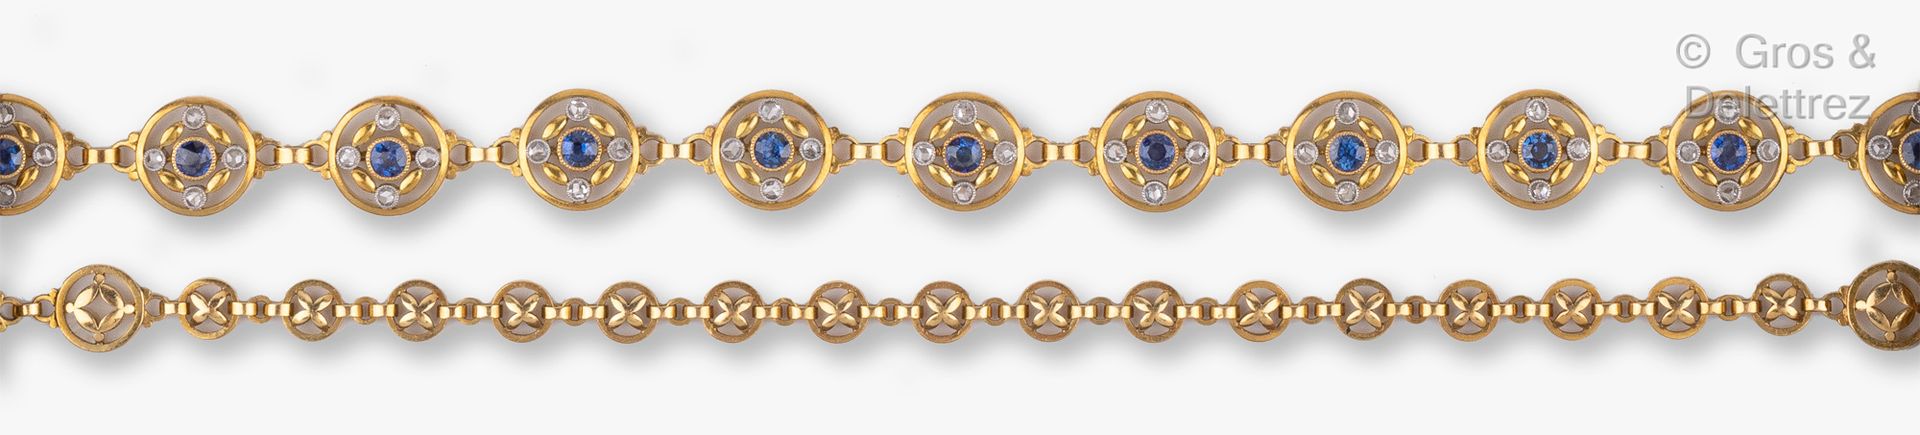 Null Yellow gold "Ras-de-cou" necklace with round links set with blue stones bor&hellip;